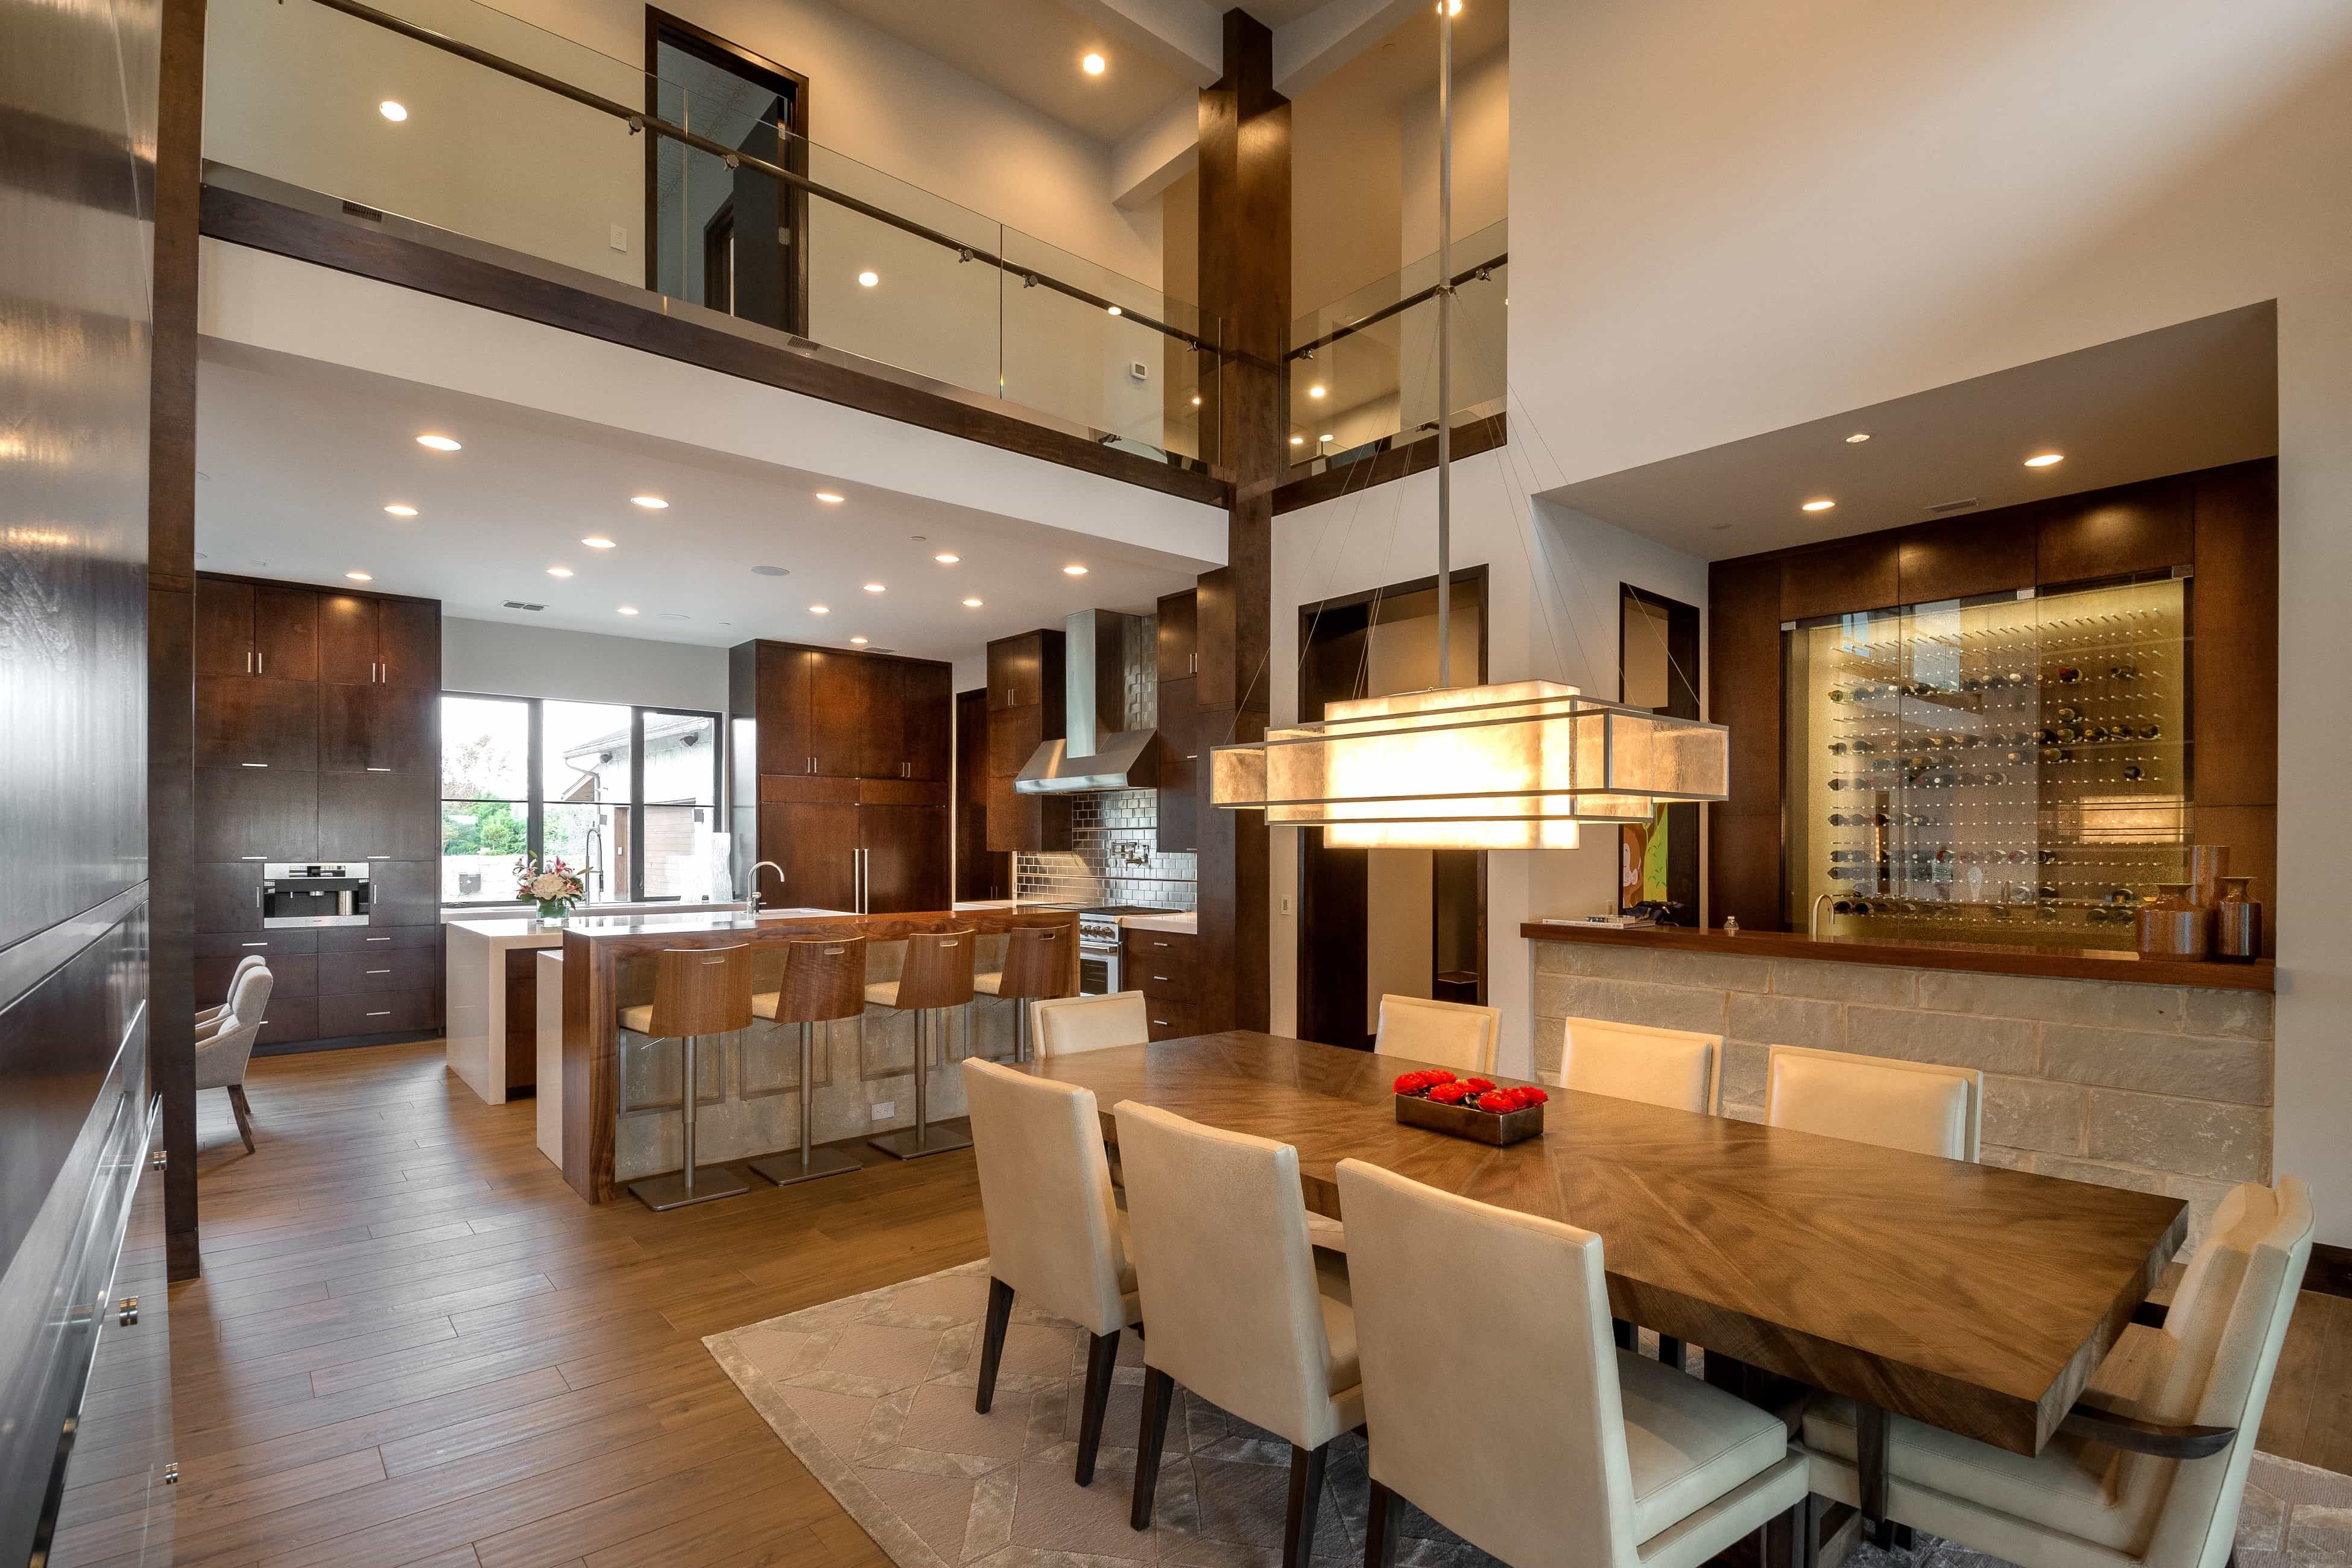 Contemporary Italian Kitchen And Dining Room Combo  (View 3 of 10)